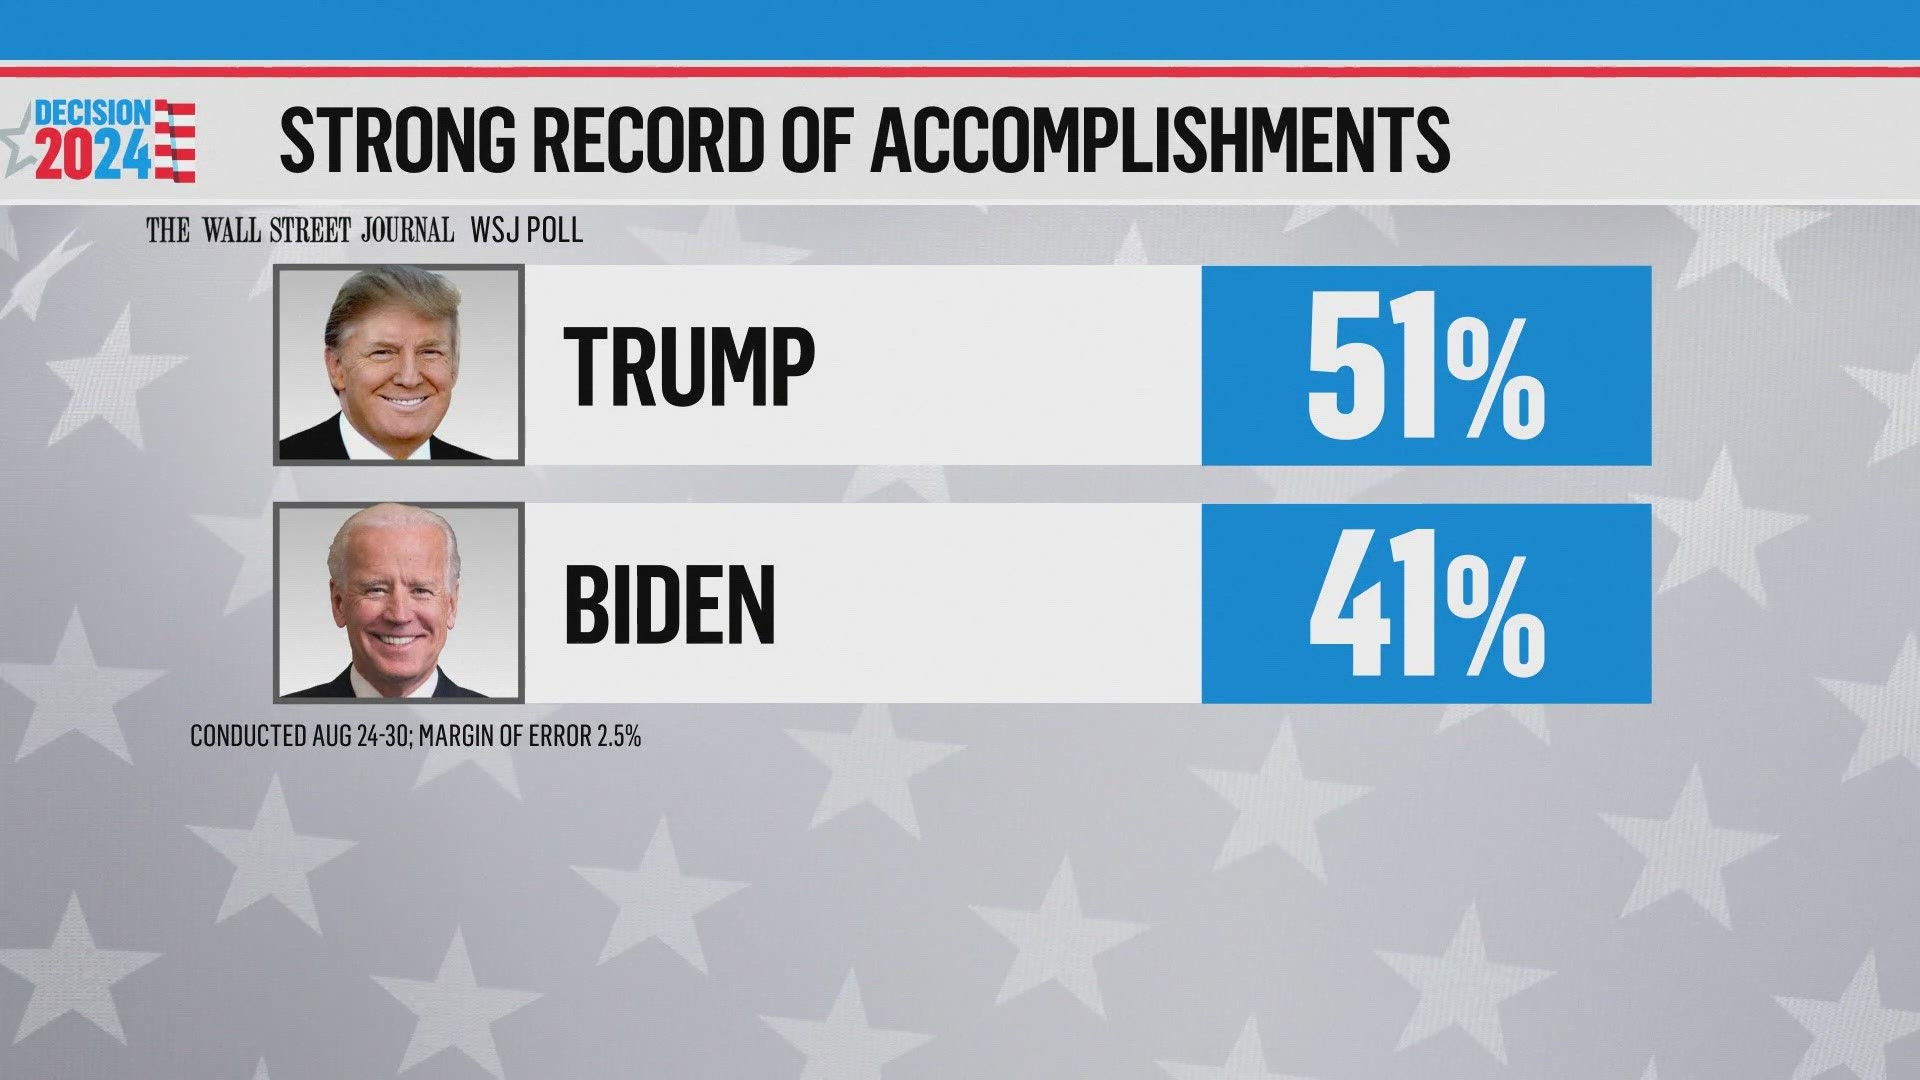 Trump vs. Biden? We could have a 2020 rematch in 2024